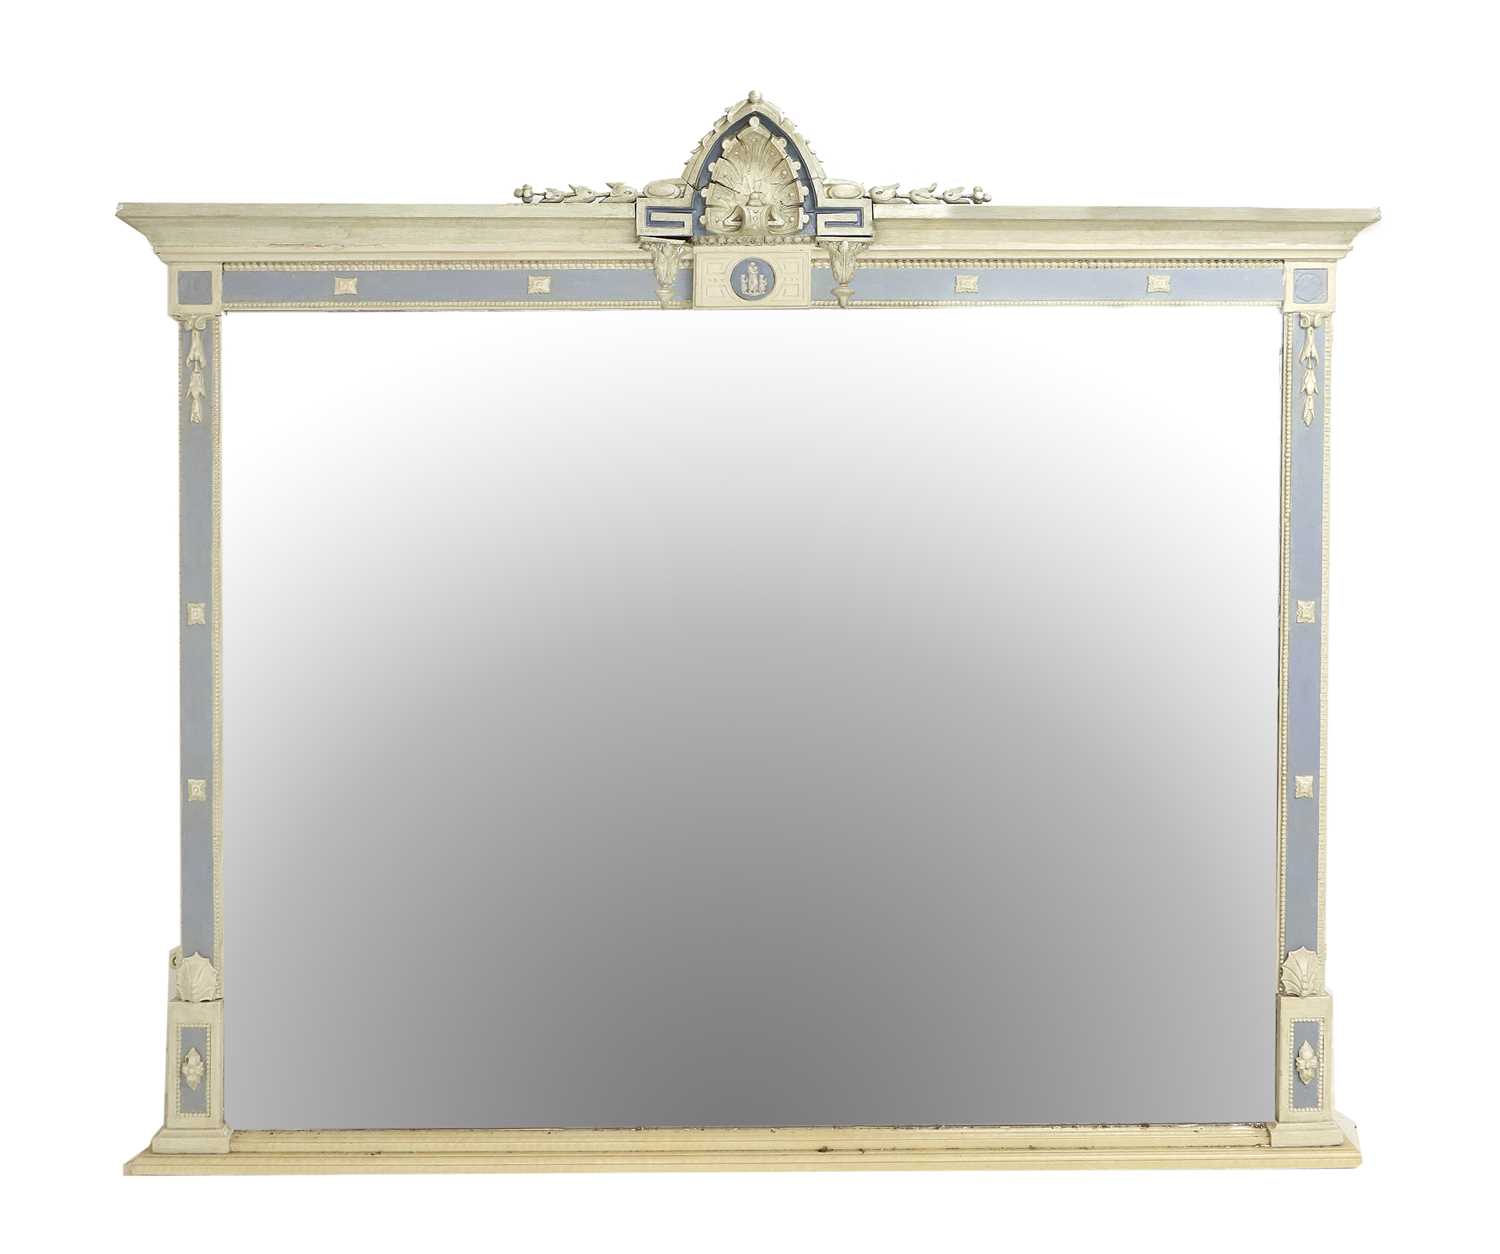 An Early Victorian Gilt and Gesso Overmantel Mirror, mid 19th century, repainted white and blue, the